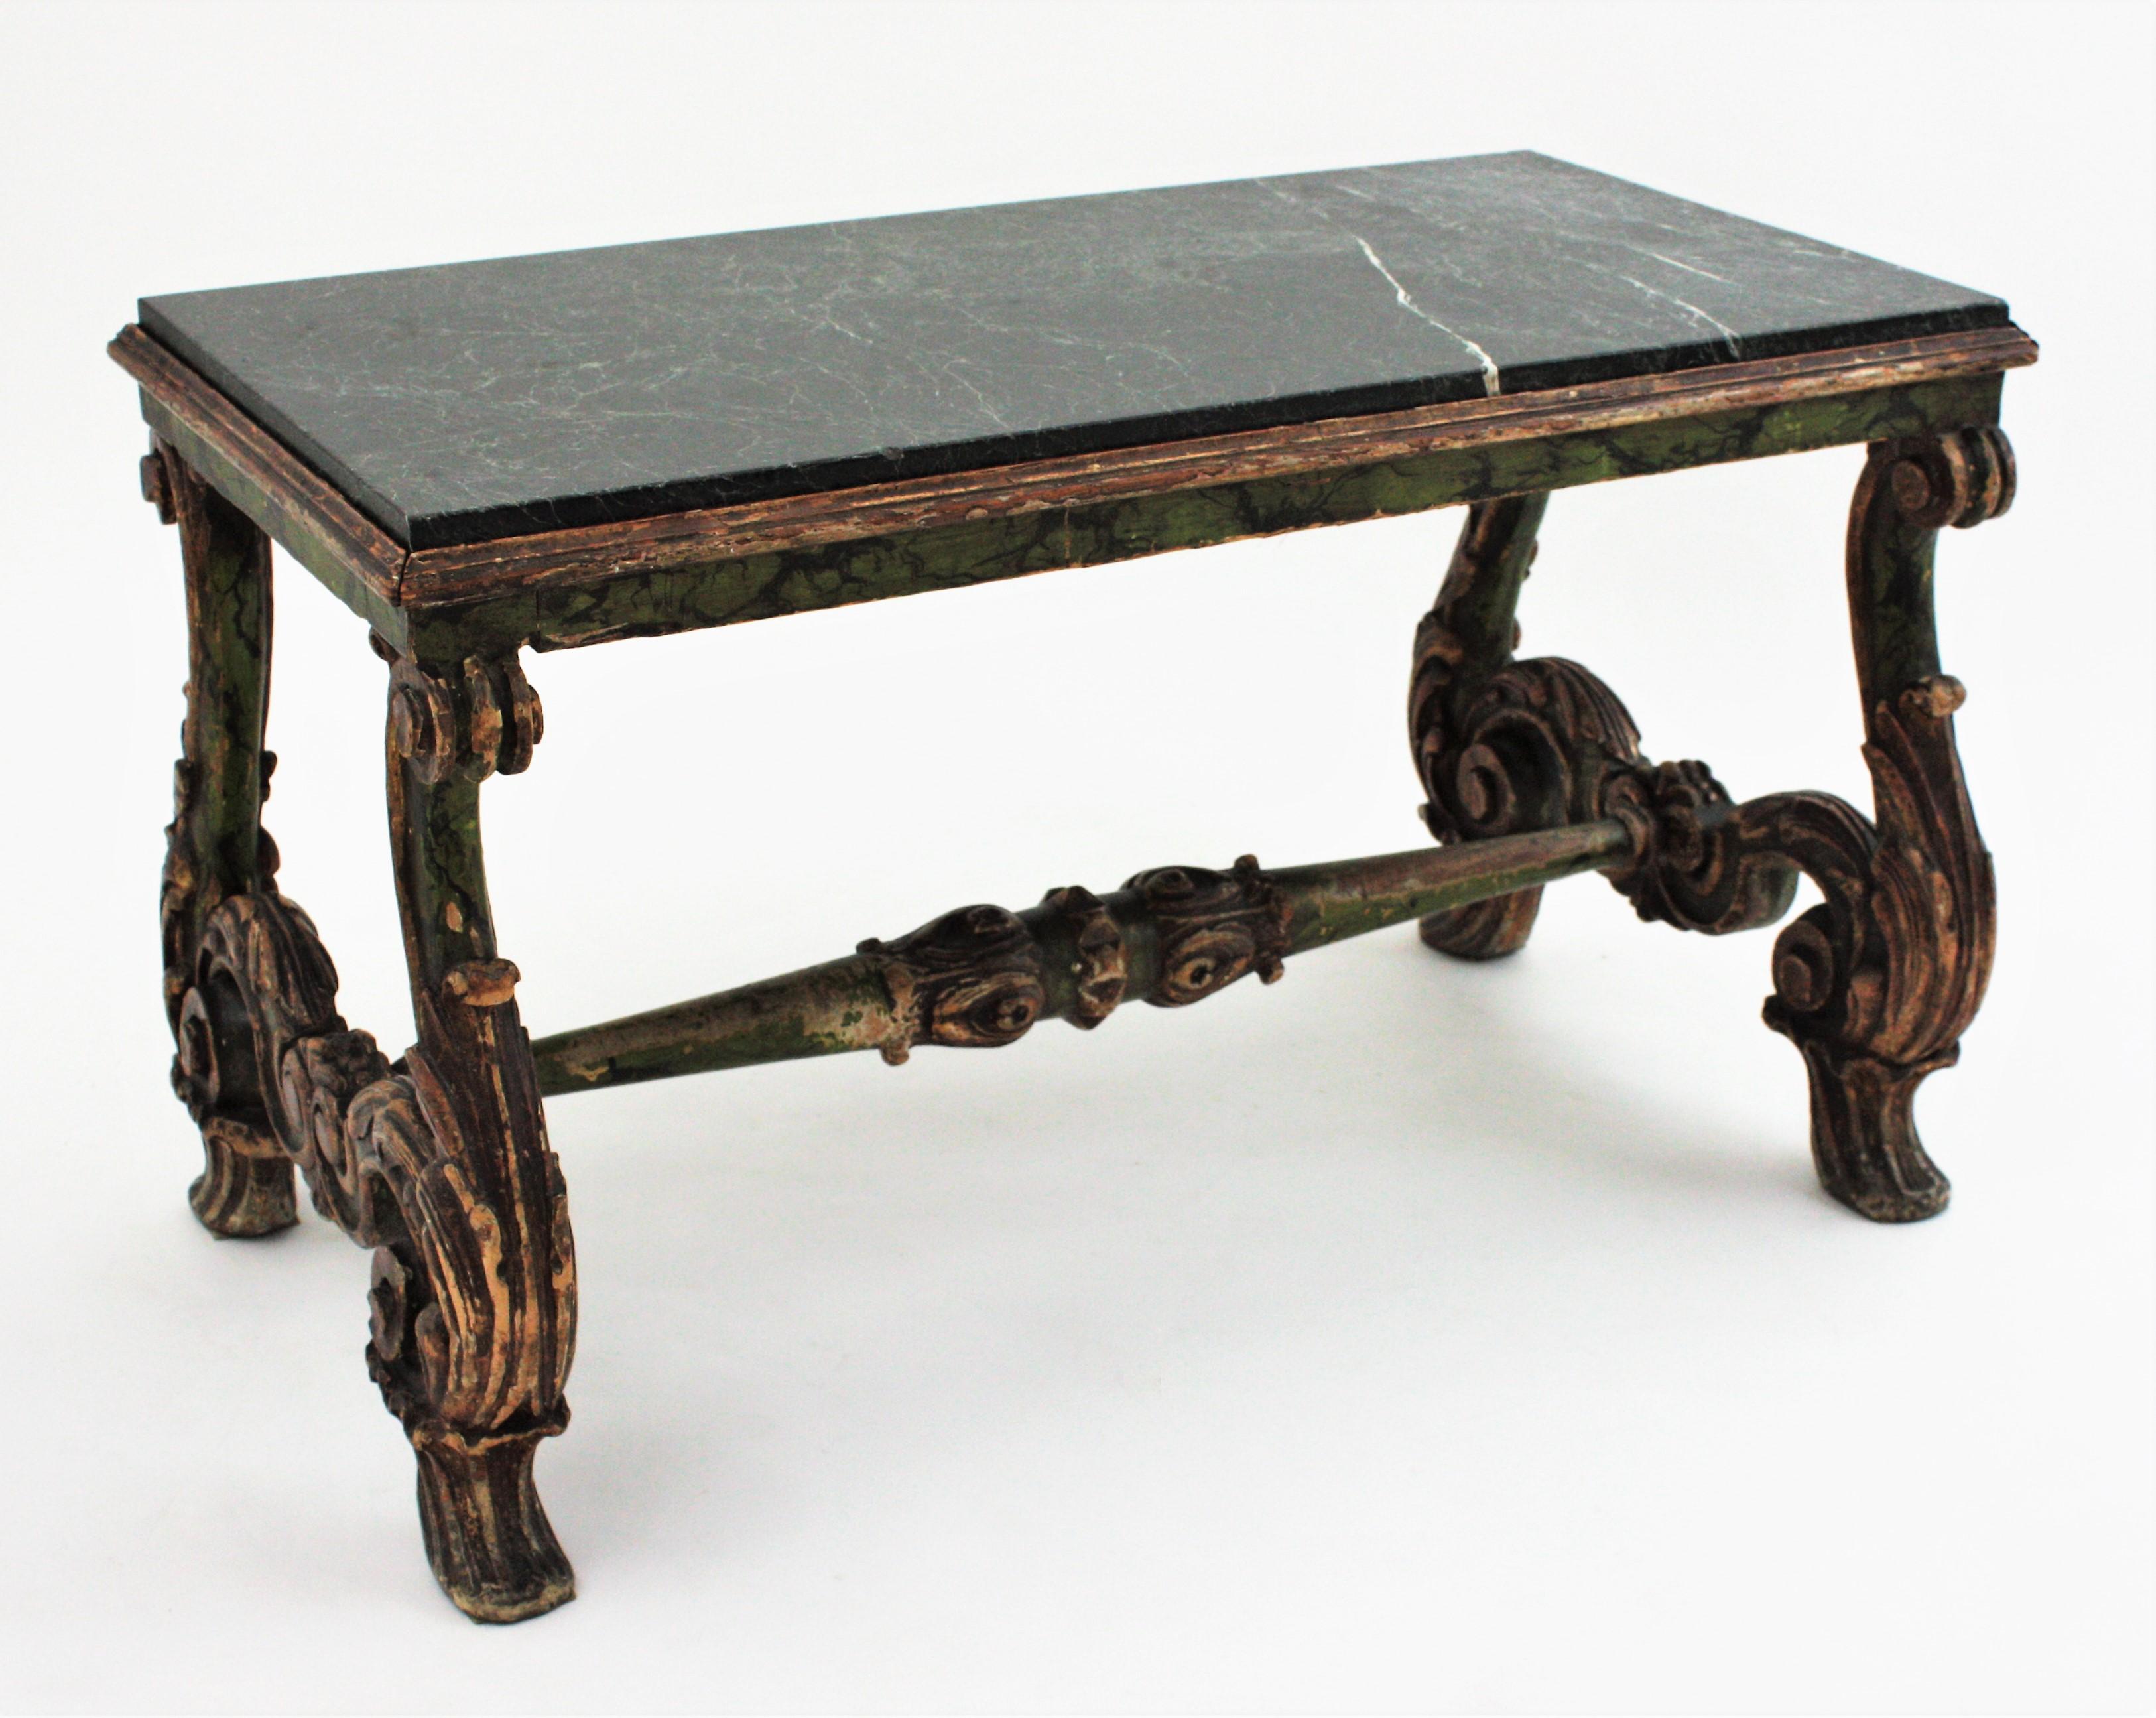 Baroque Revival Spanish Baroque Carved Wood Coffee Table with Green Marble Top For Sale